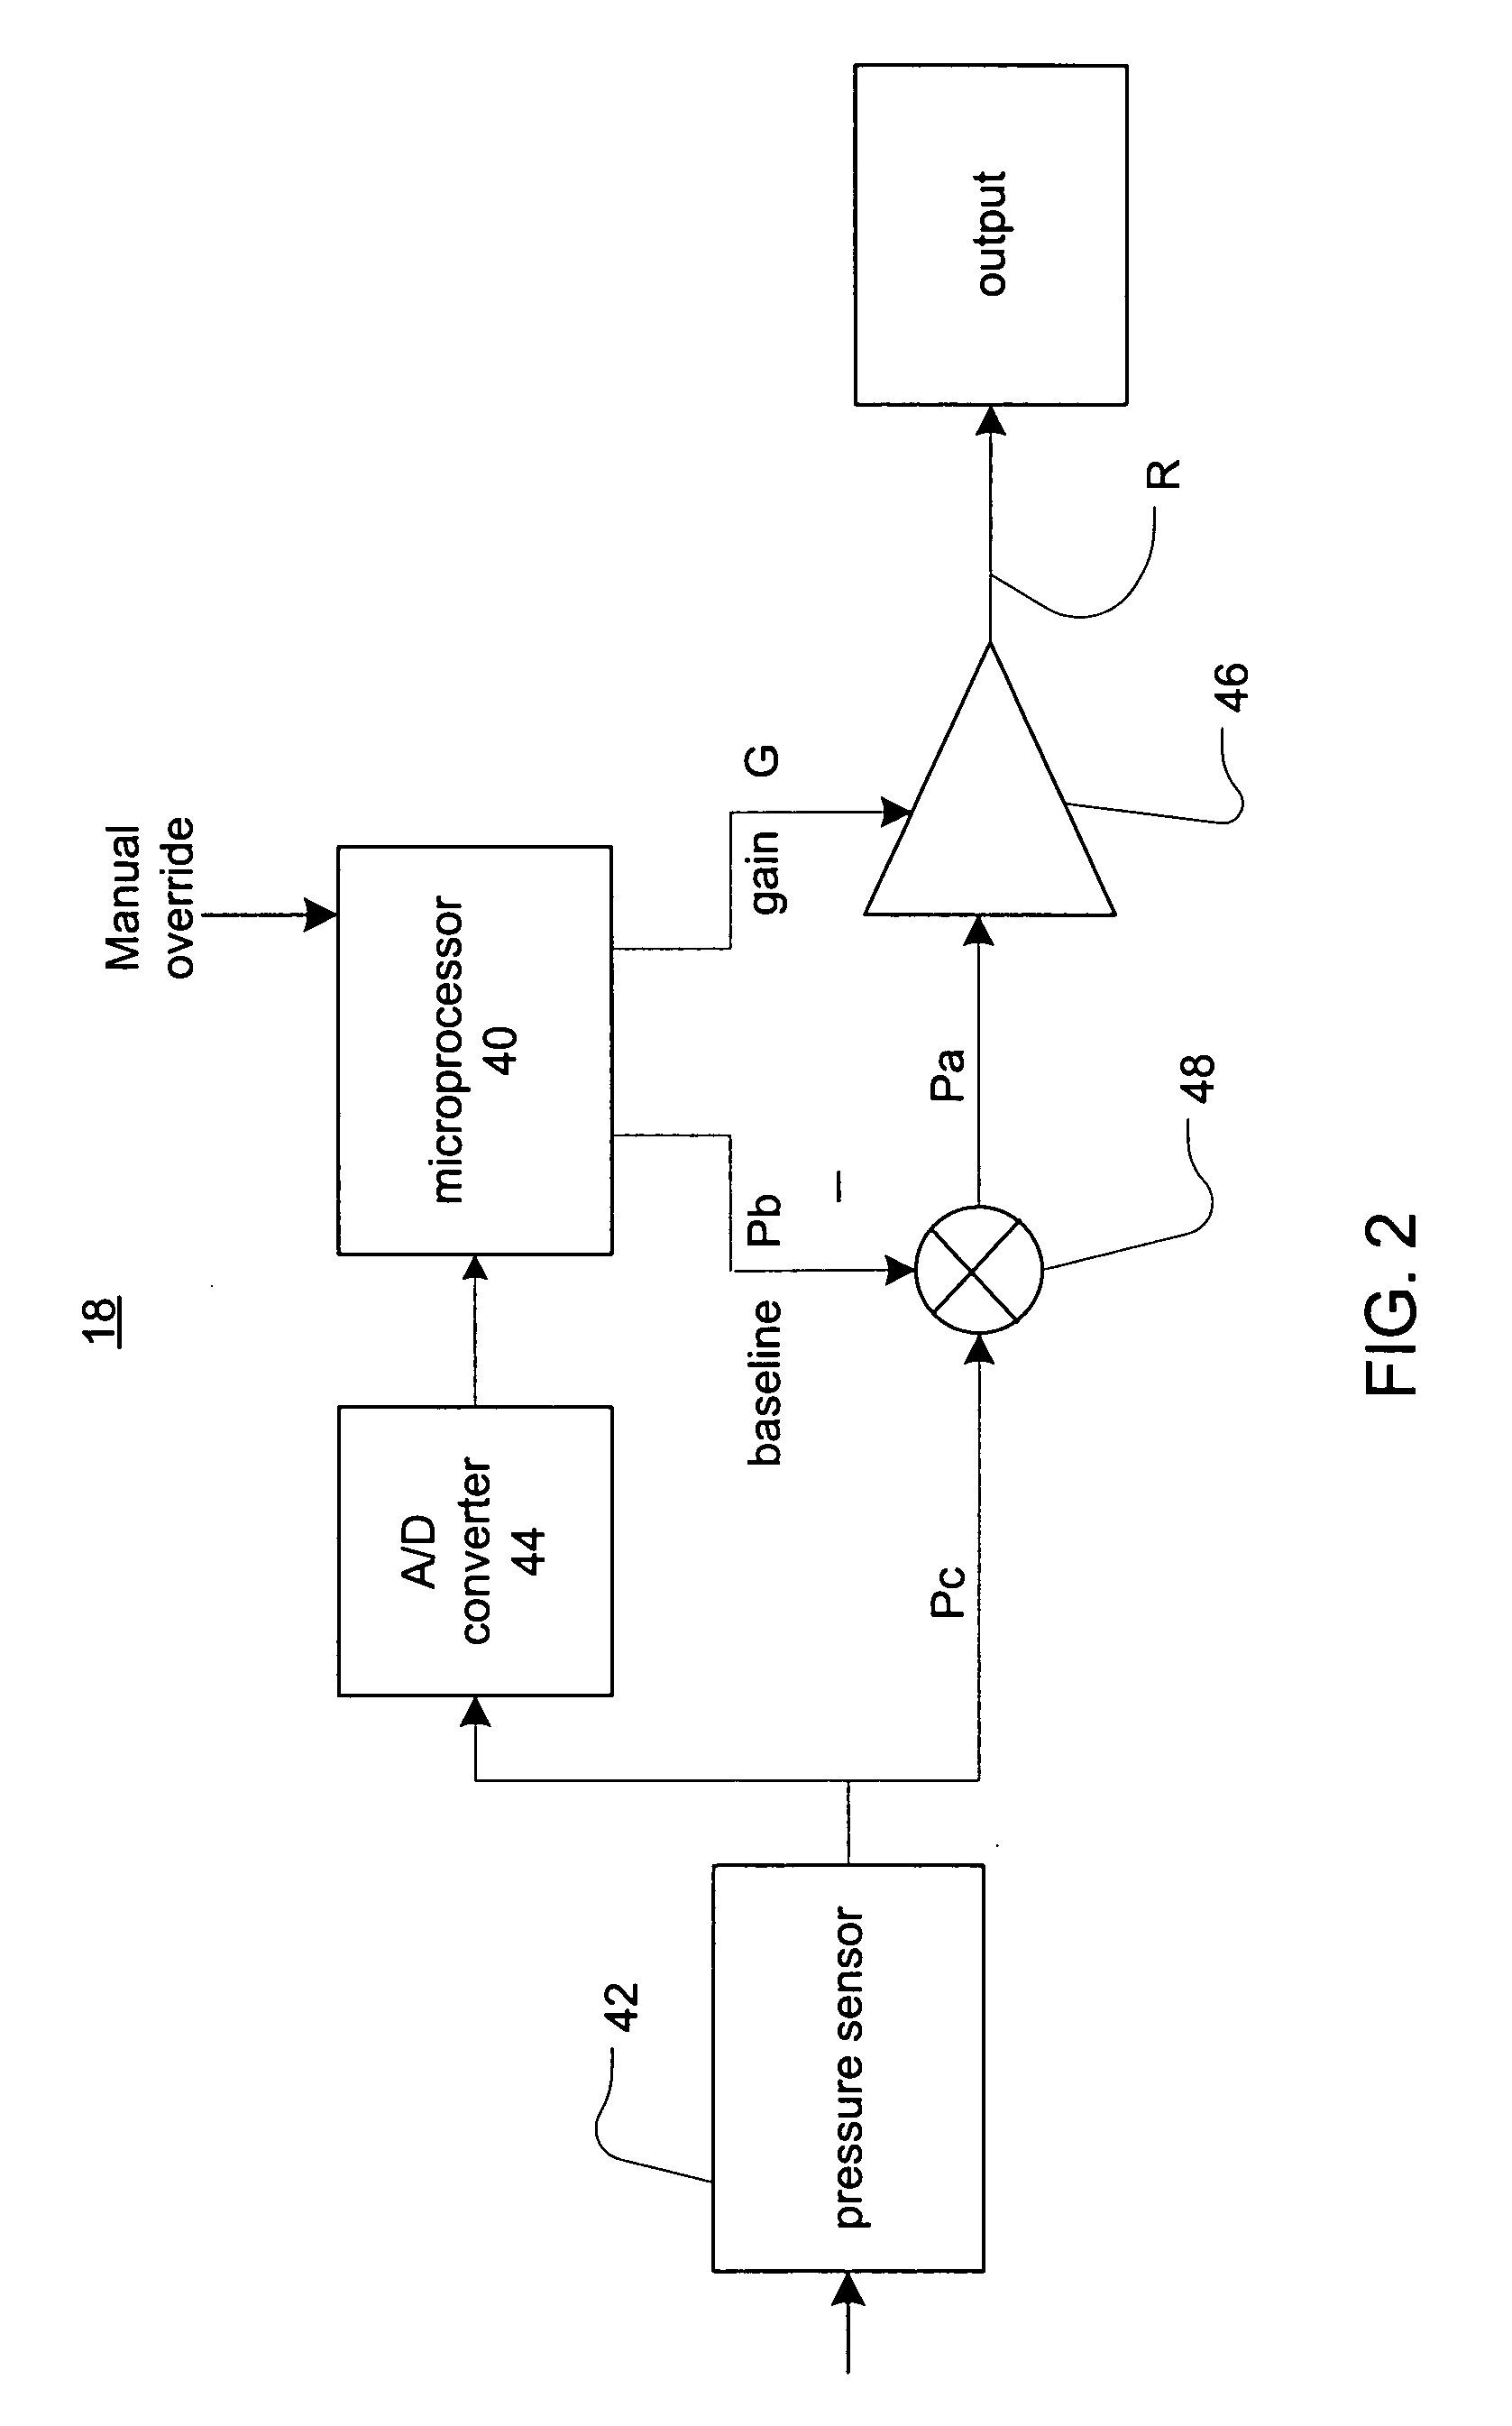 Apparatus with automatic respiration monitoring and display